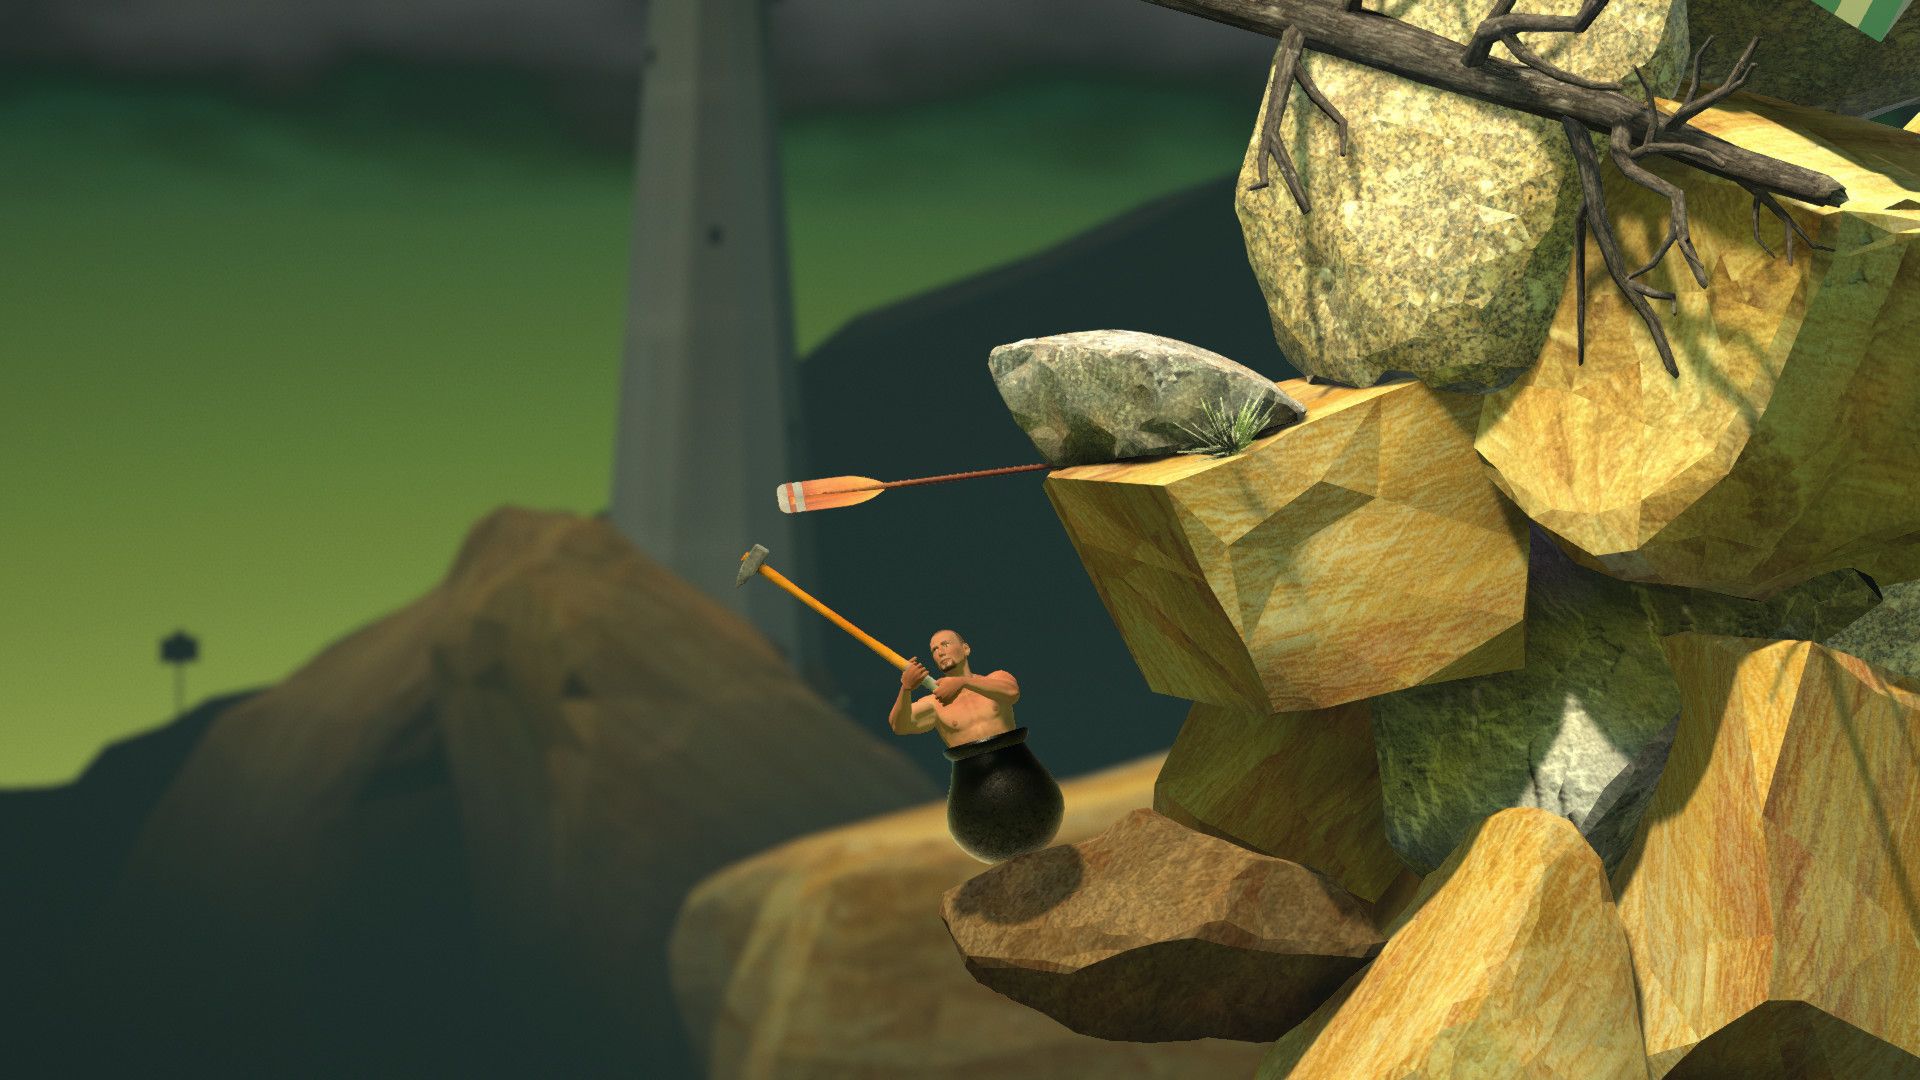 download getting over it with bennett foddy reddit